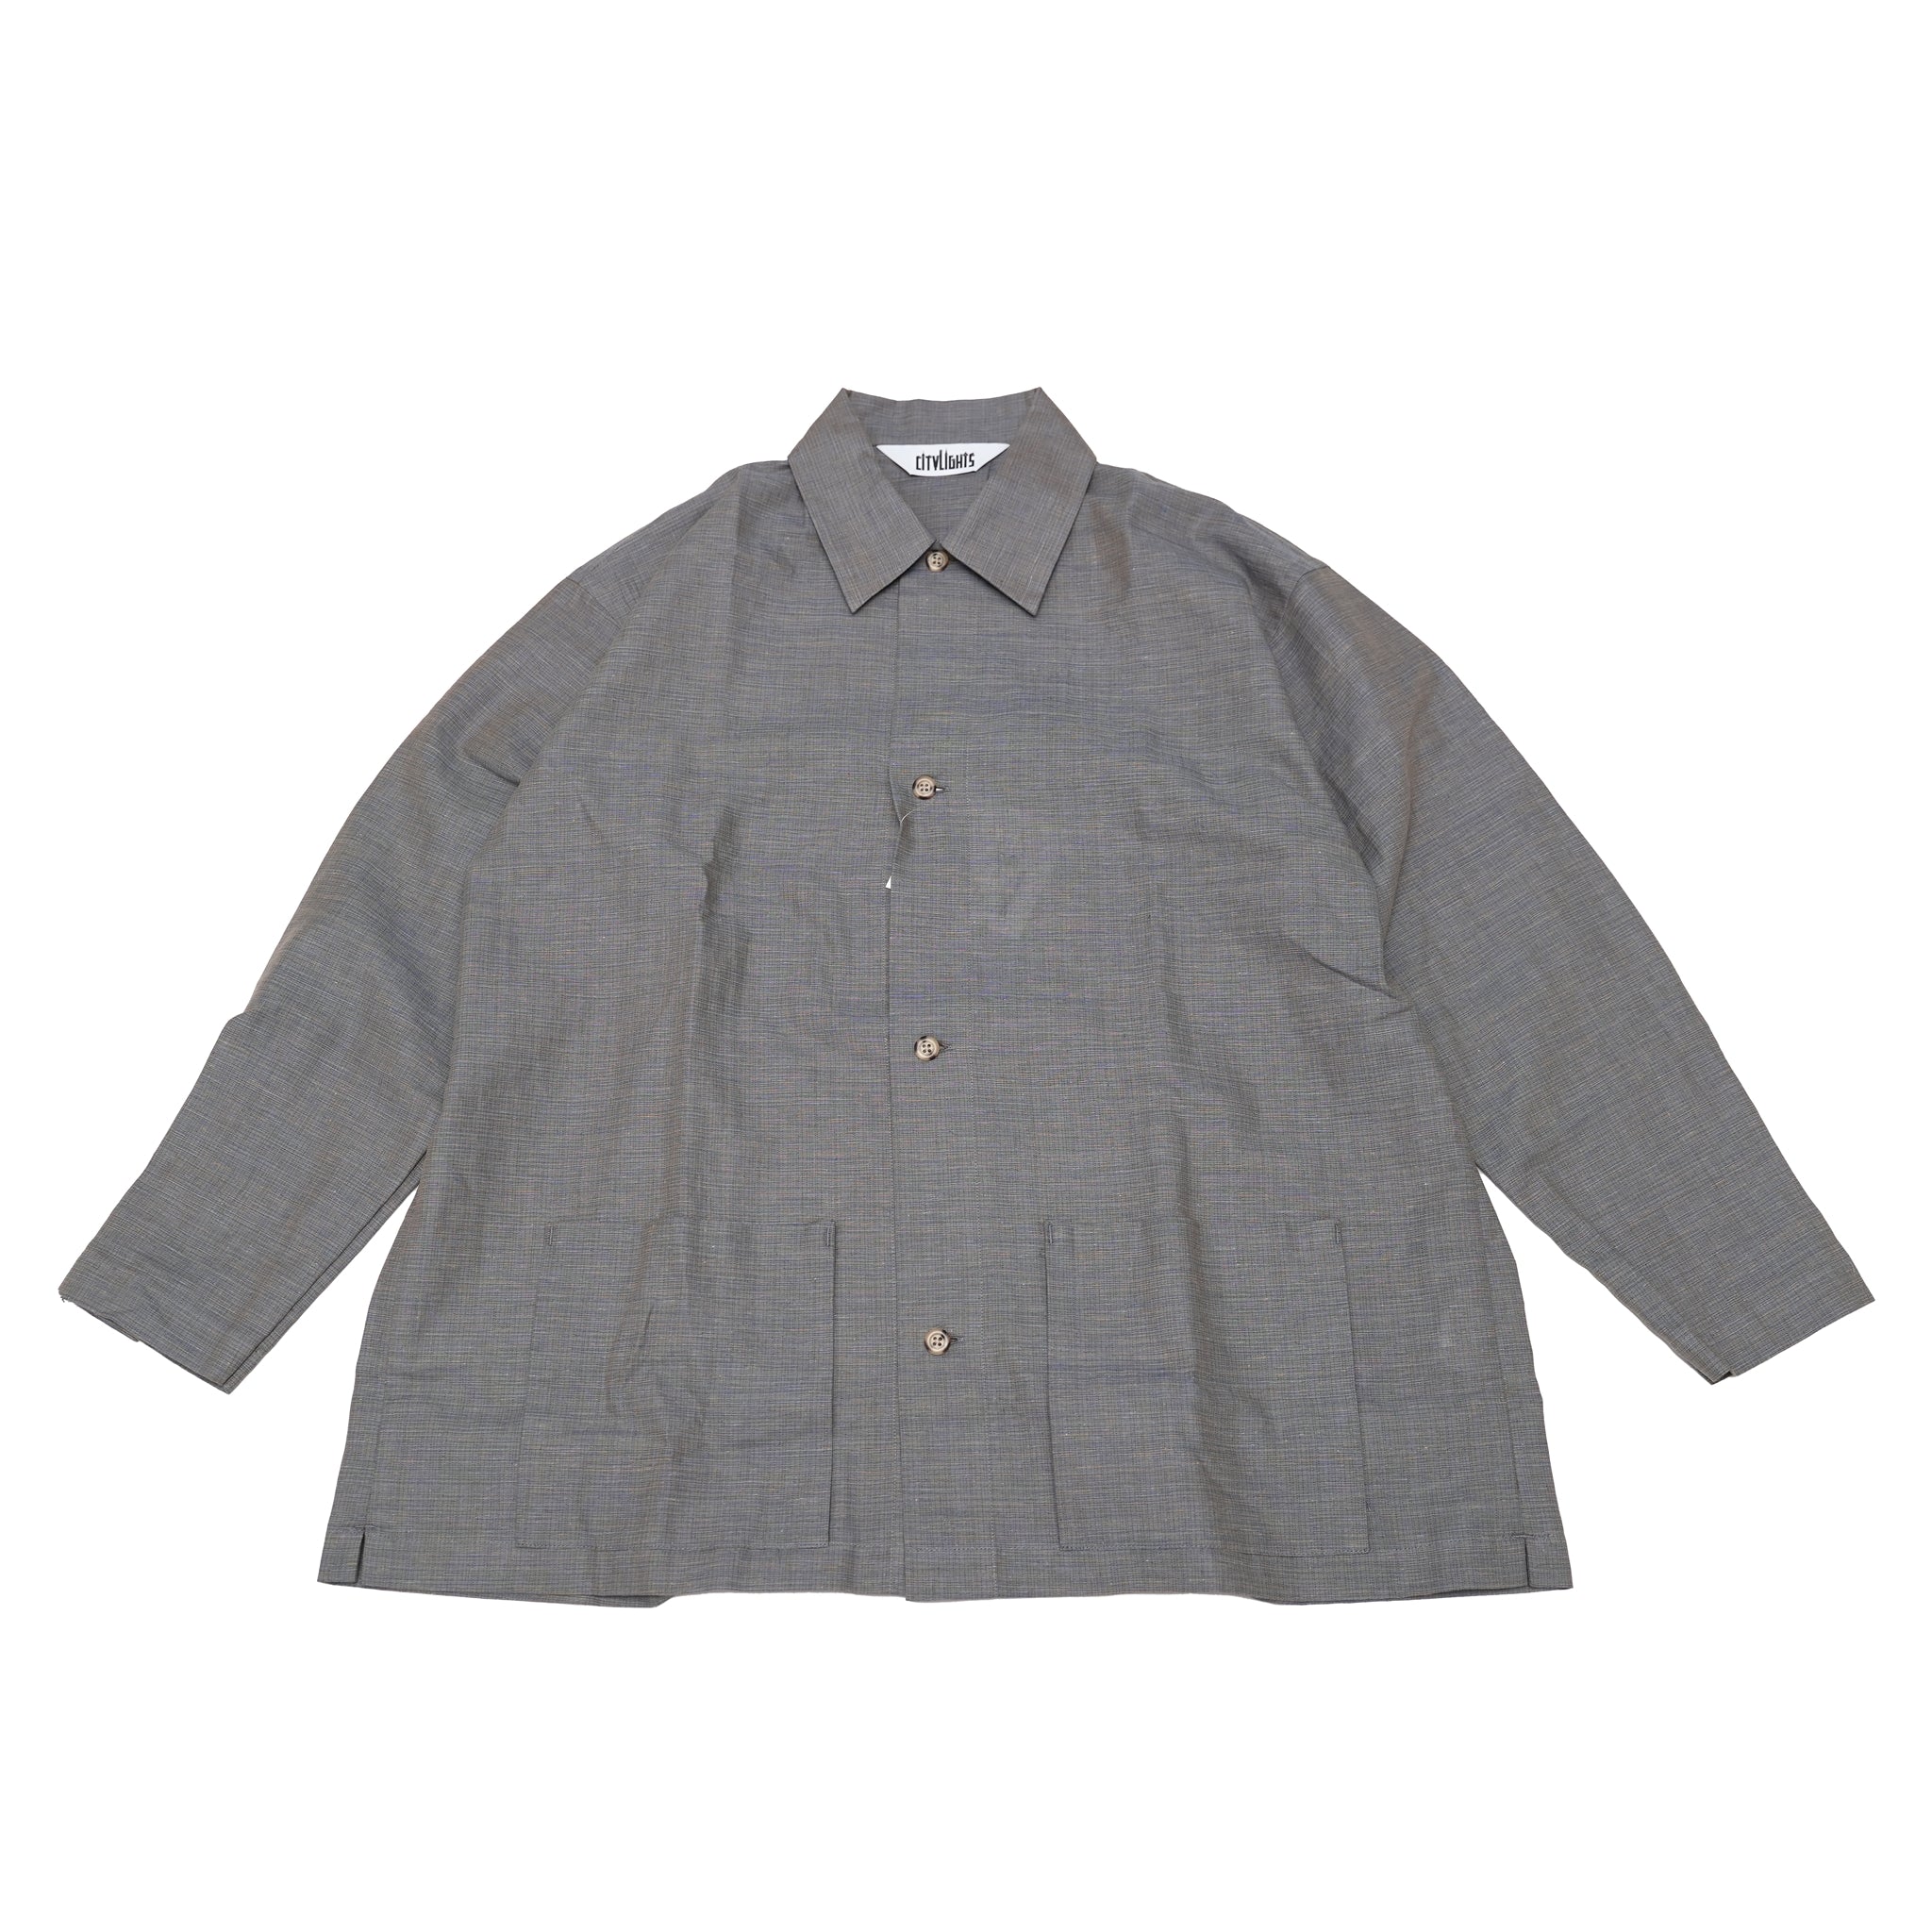 Name:Tropic (Weight) Shirts | Color:BLUE MIX | Size:Free 【CITYLIGHTS PRODUCTS_シティライツプロダクツ】